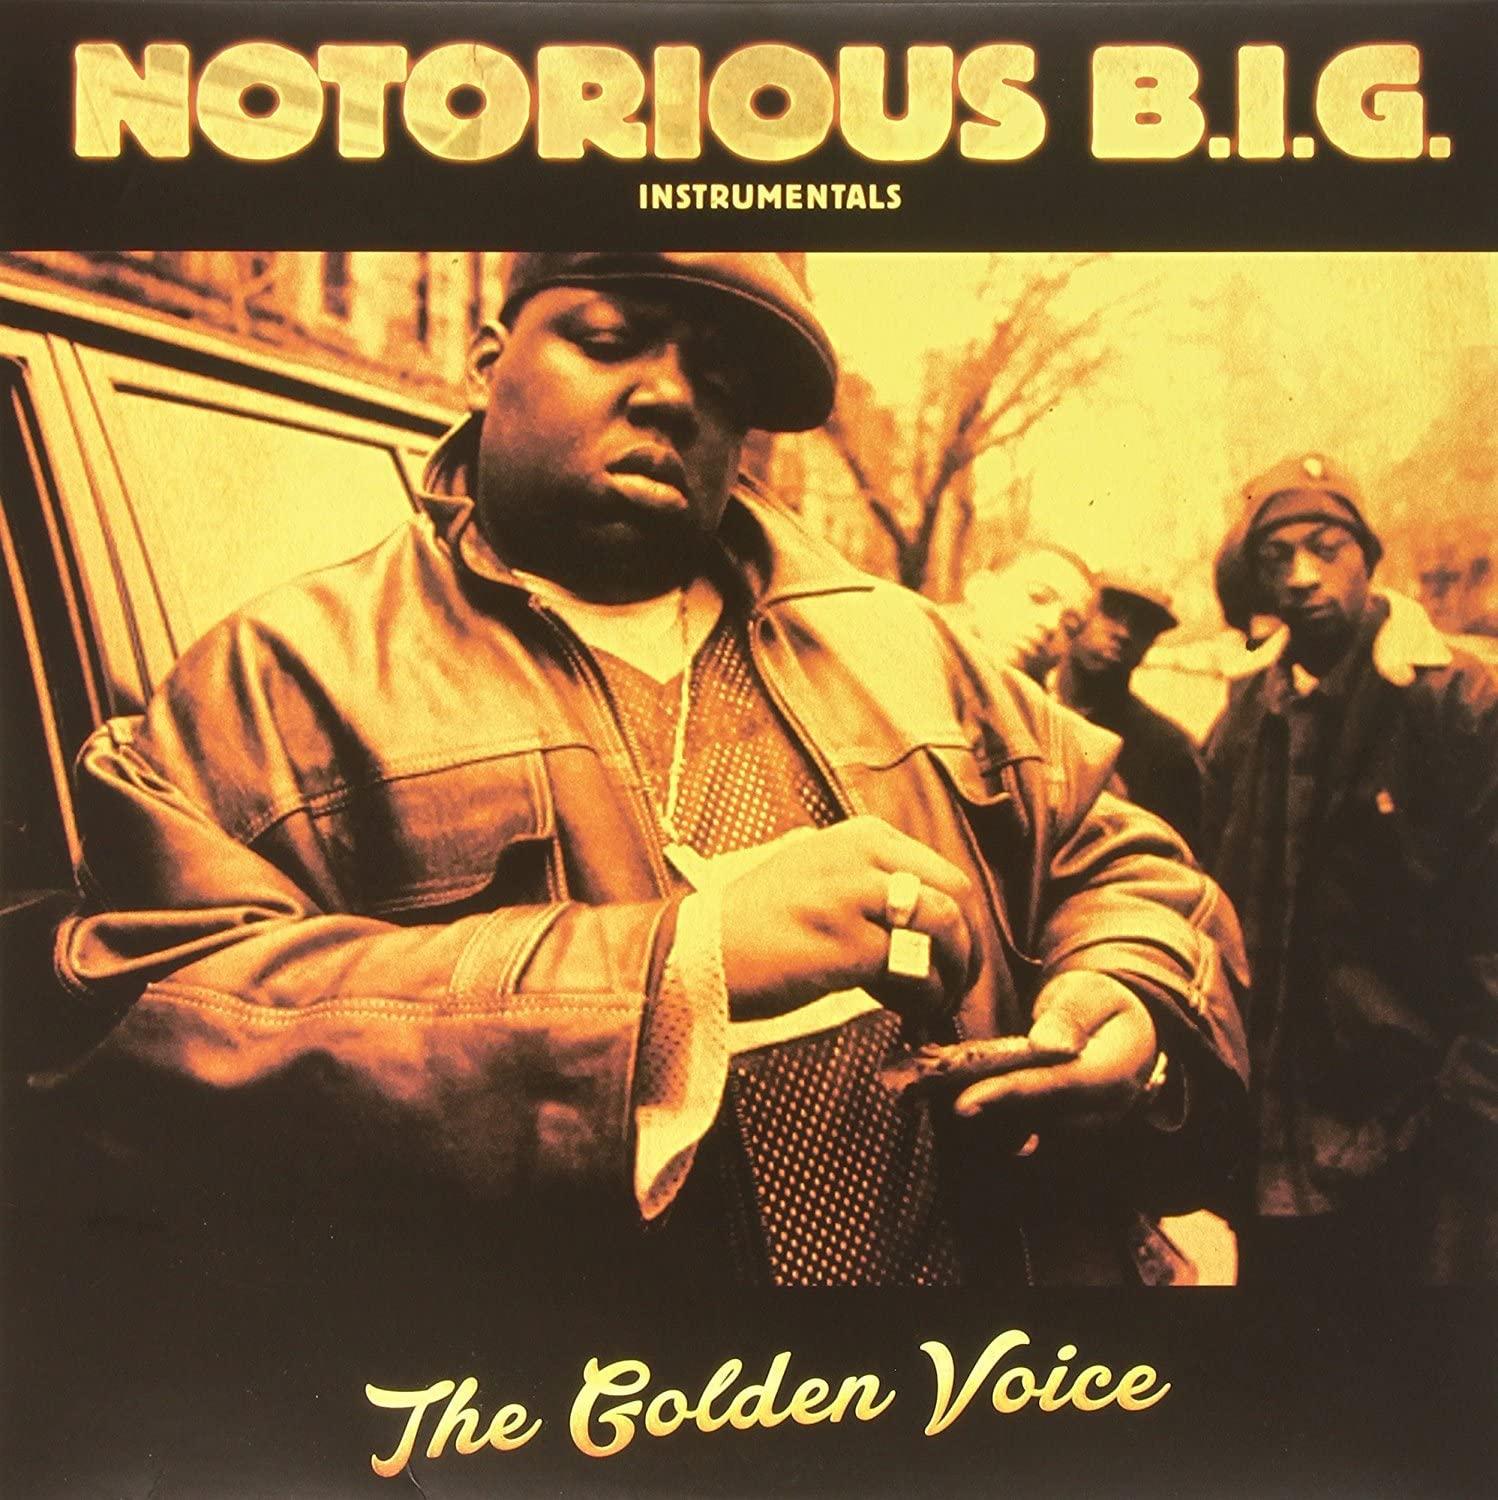 The Notorious B.I.G. - The Golden Voice IntrumentaLS (2015) 2LP